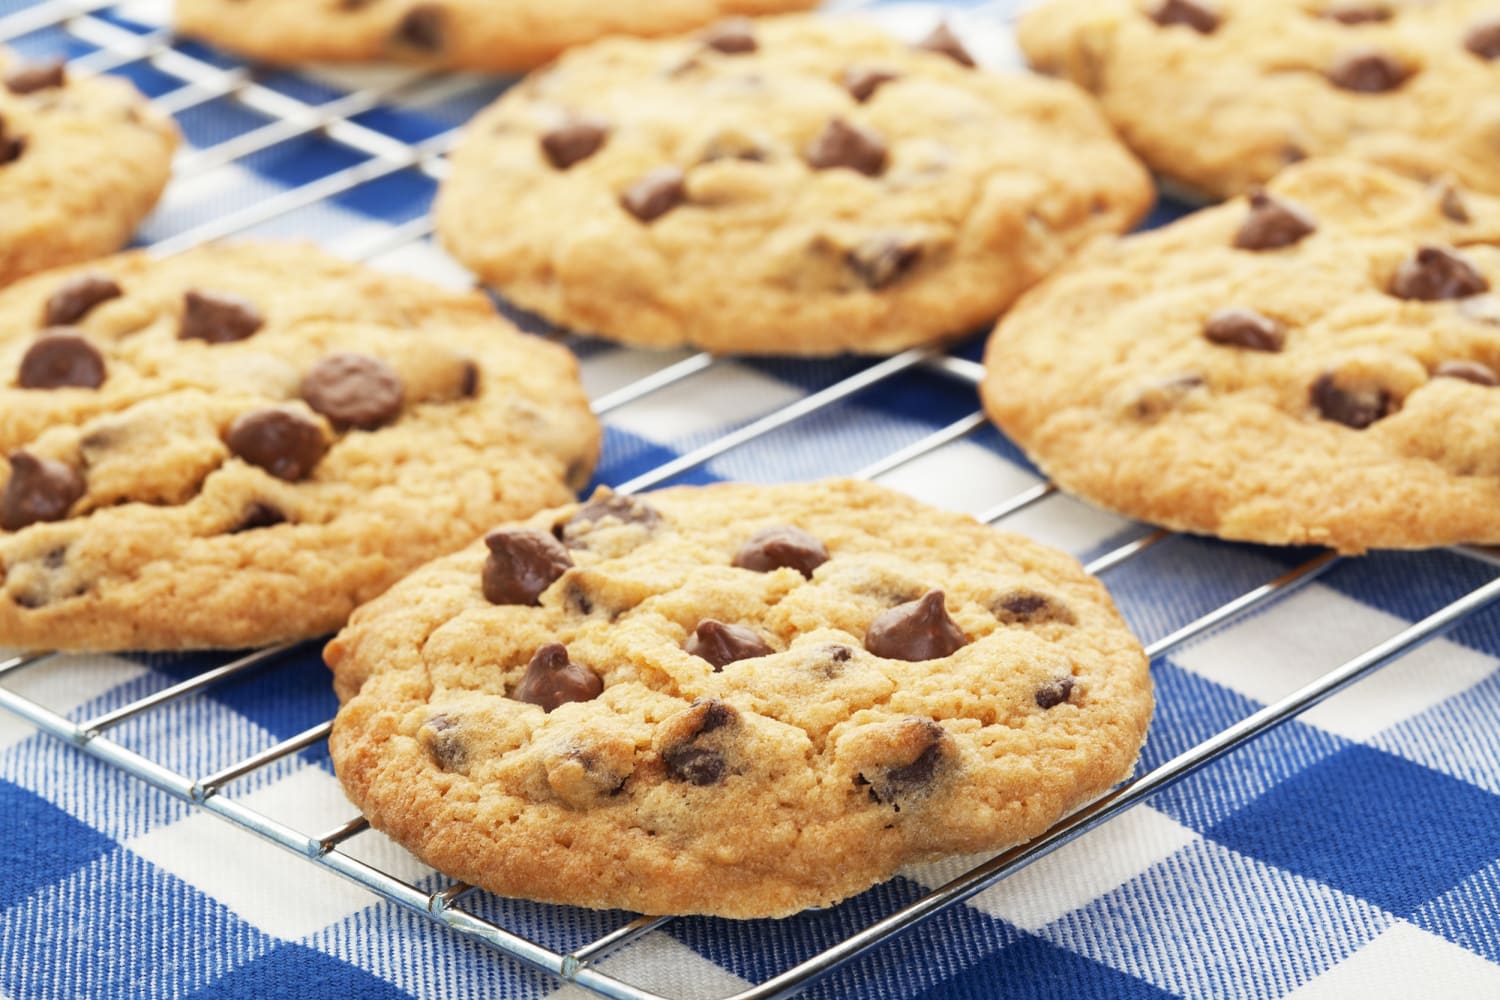 https://media-cldnry.s-nbcnews.com/image/upload/rockcms/2023-08/national-chocolate-chip-cookie-day-zz-230803-5952ed.jpg